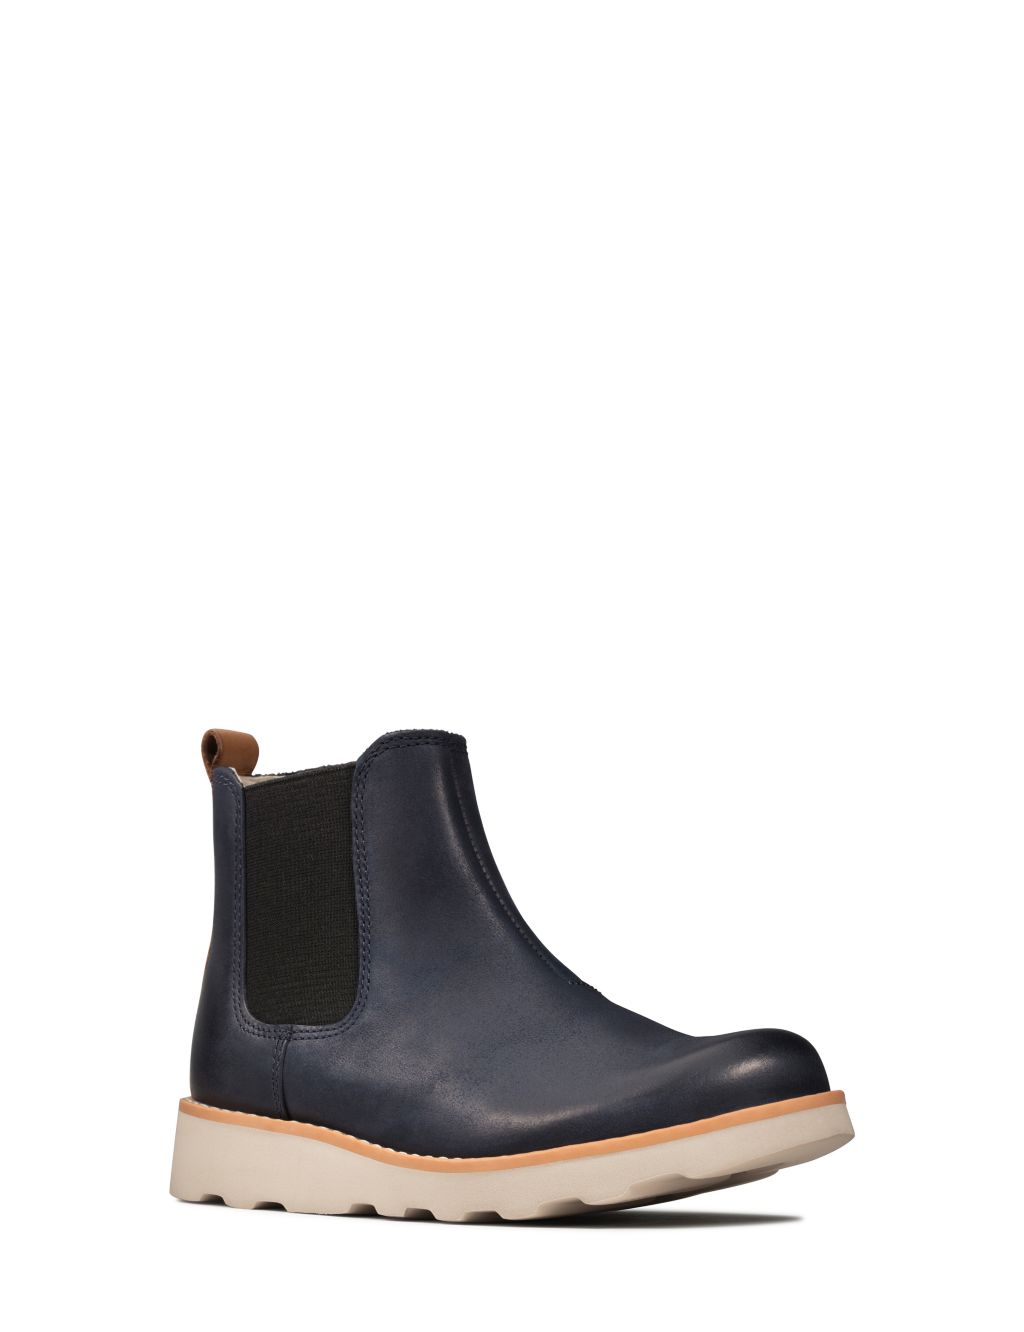 Kids' Leather Chelsea Boots image 2